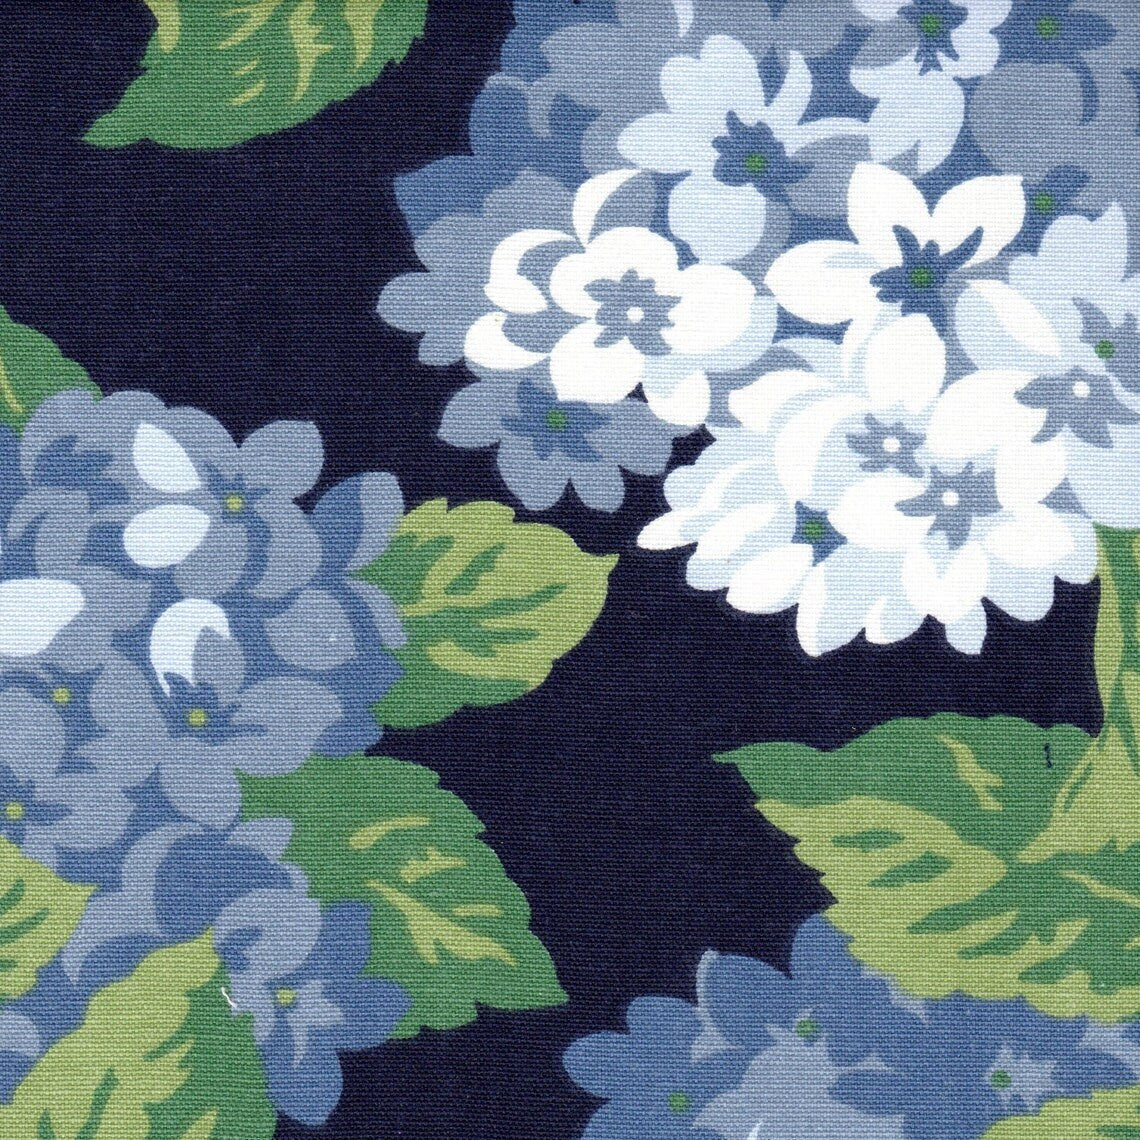 pinch pleated curtains in summerwind navy blue hydrangea floral, large scale